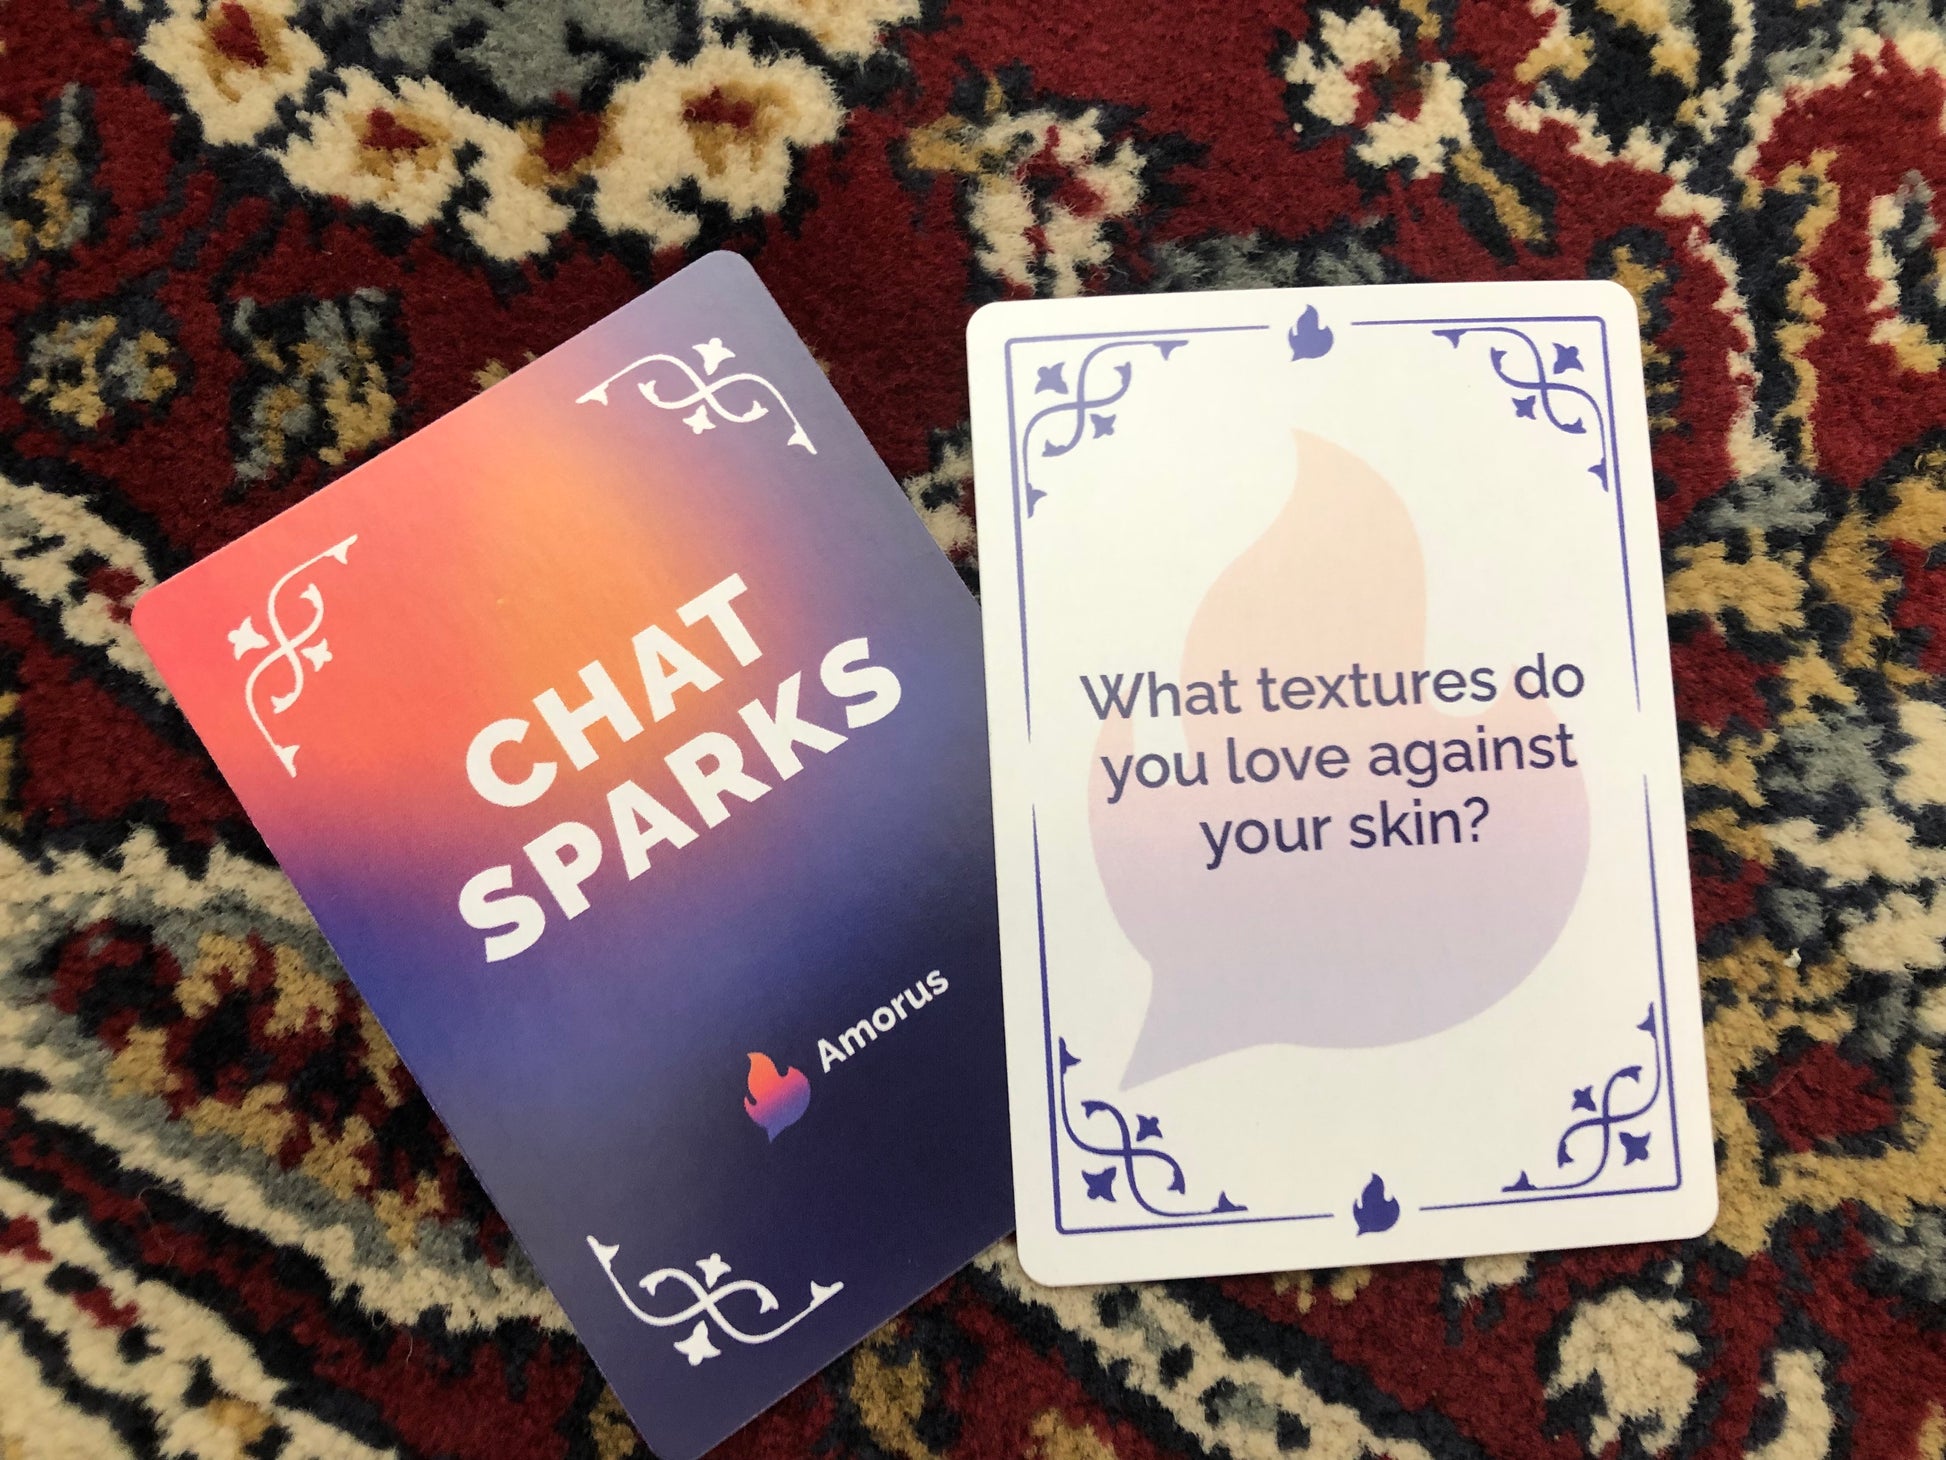 Image of Chat Sparks game card on persian rug. Card reads "What textures do you love against your skin?"